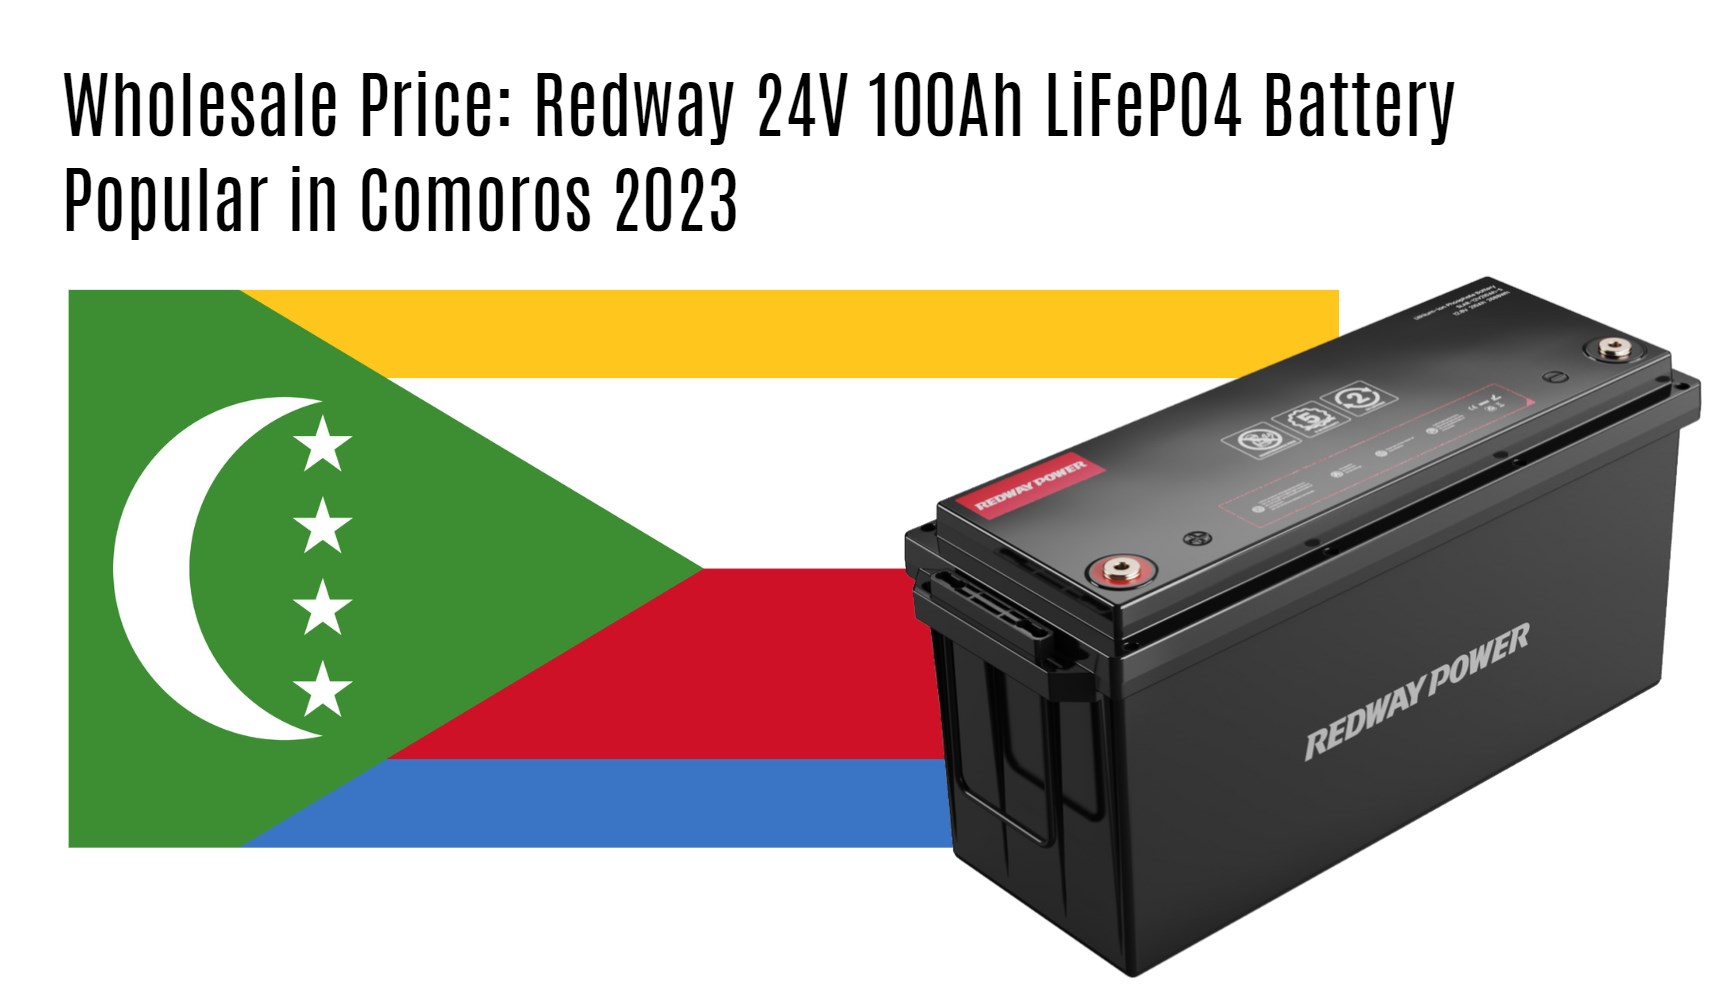 Wholesale Price: Redway 24V 100Ah LiFePO4 Battery Popular in Comoros 2023